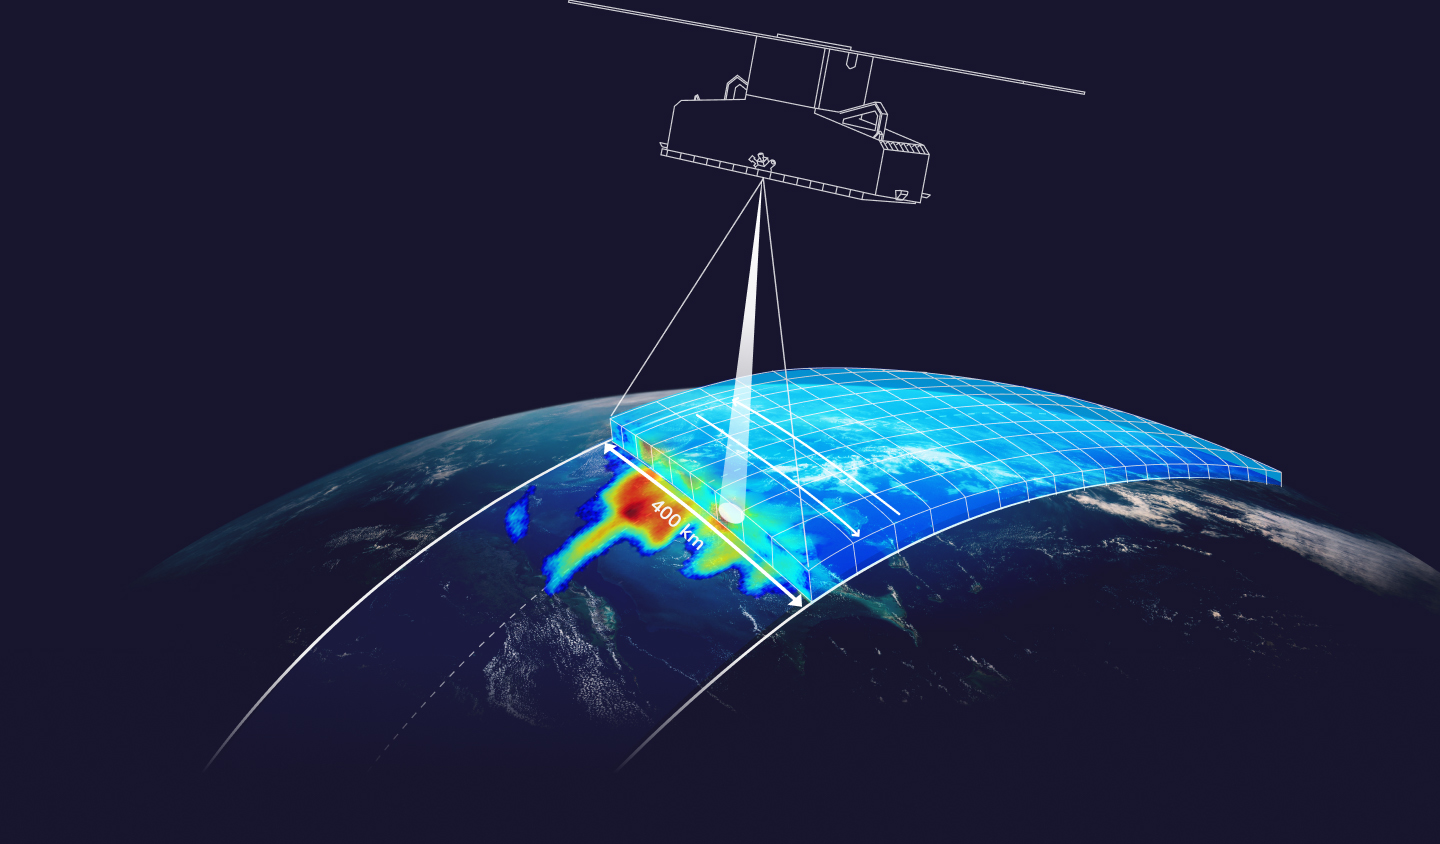 Tomorrow.io’s radar satellites use machine learning to punch well above their weight